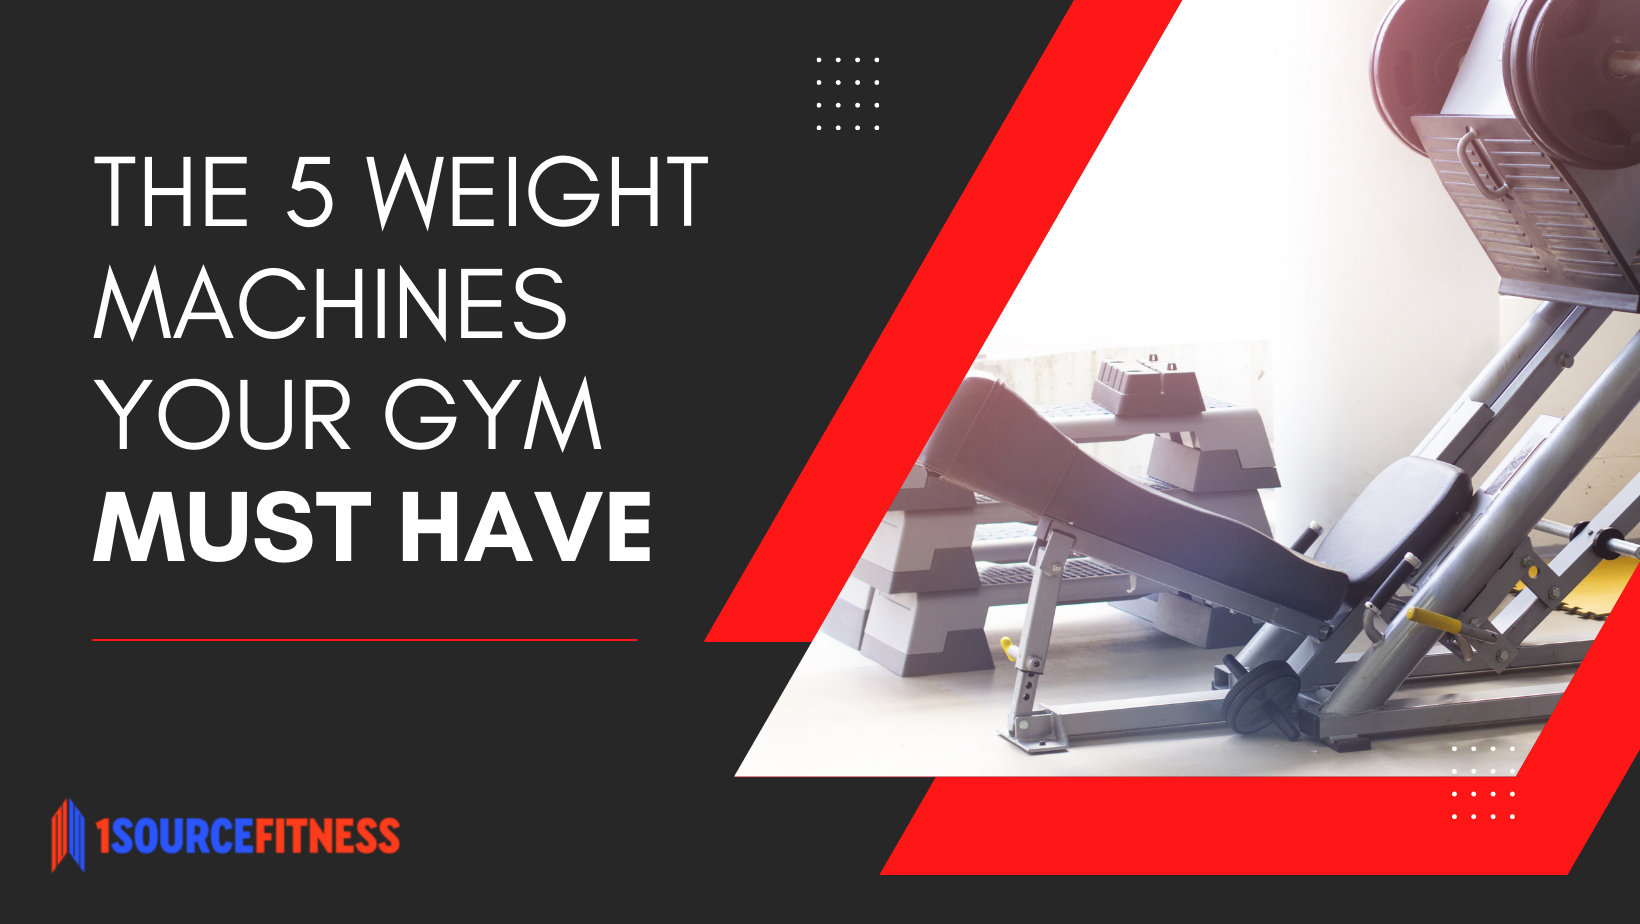 weights for your gym